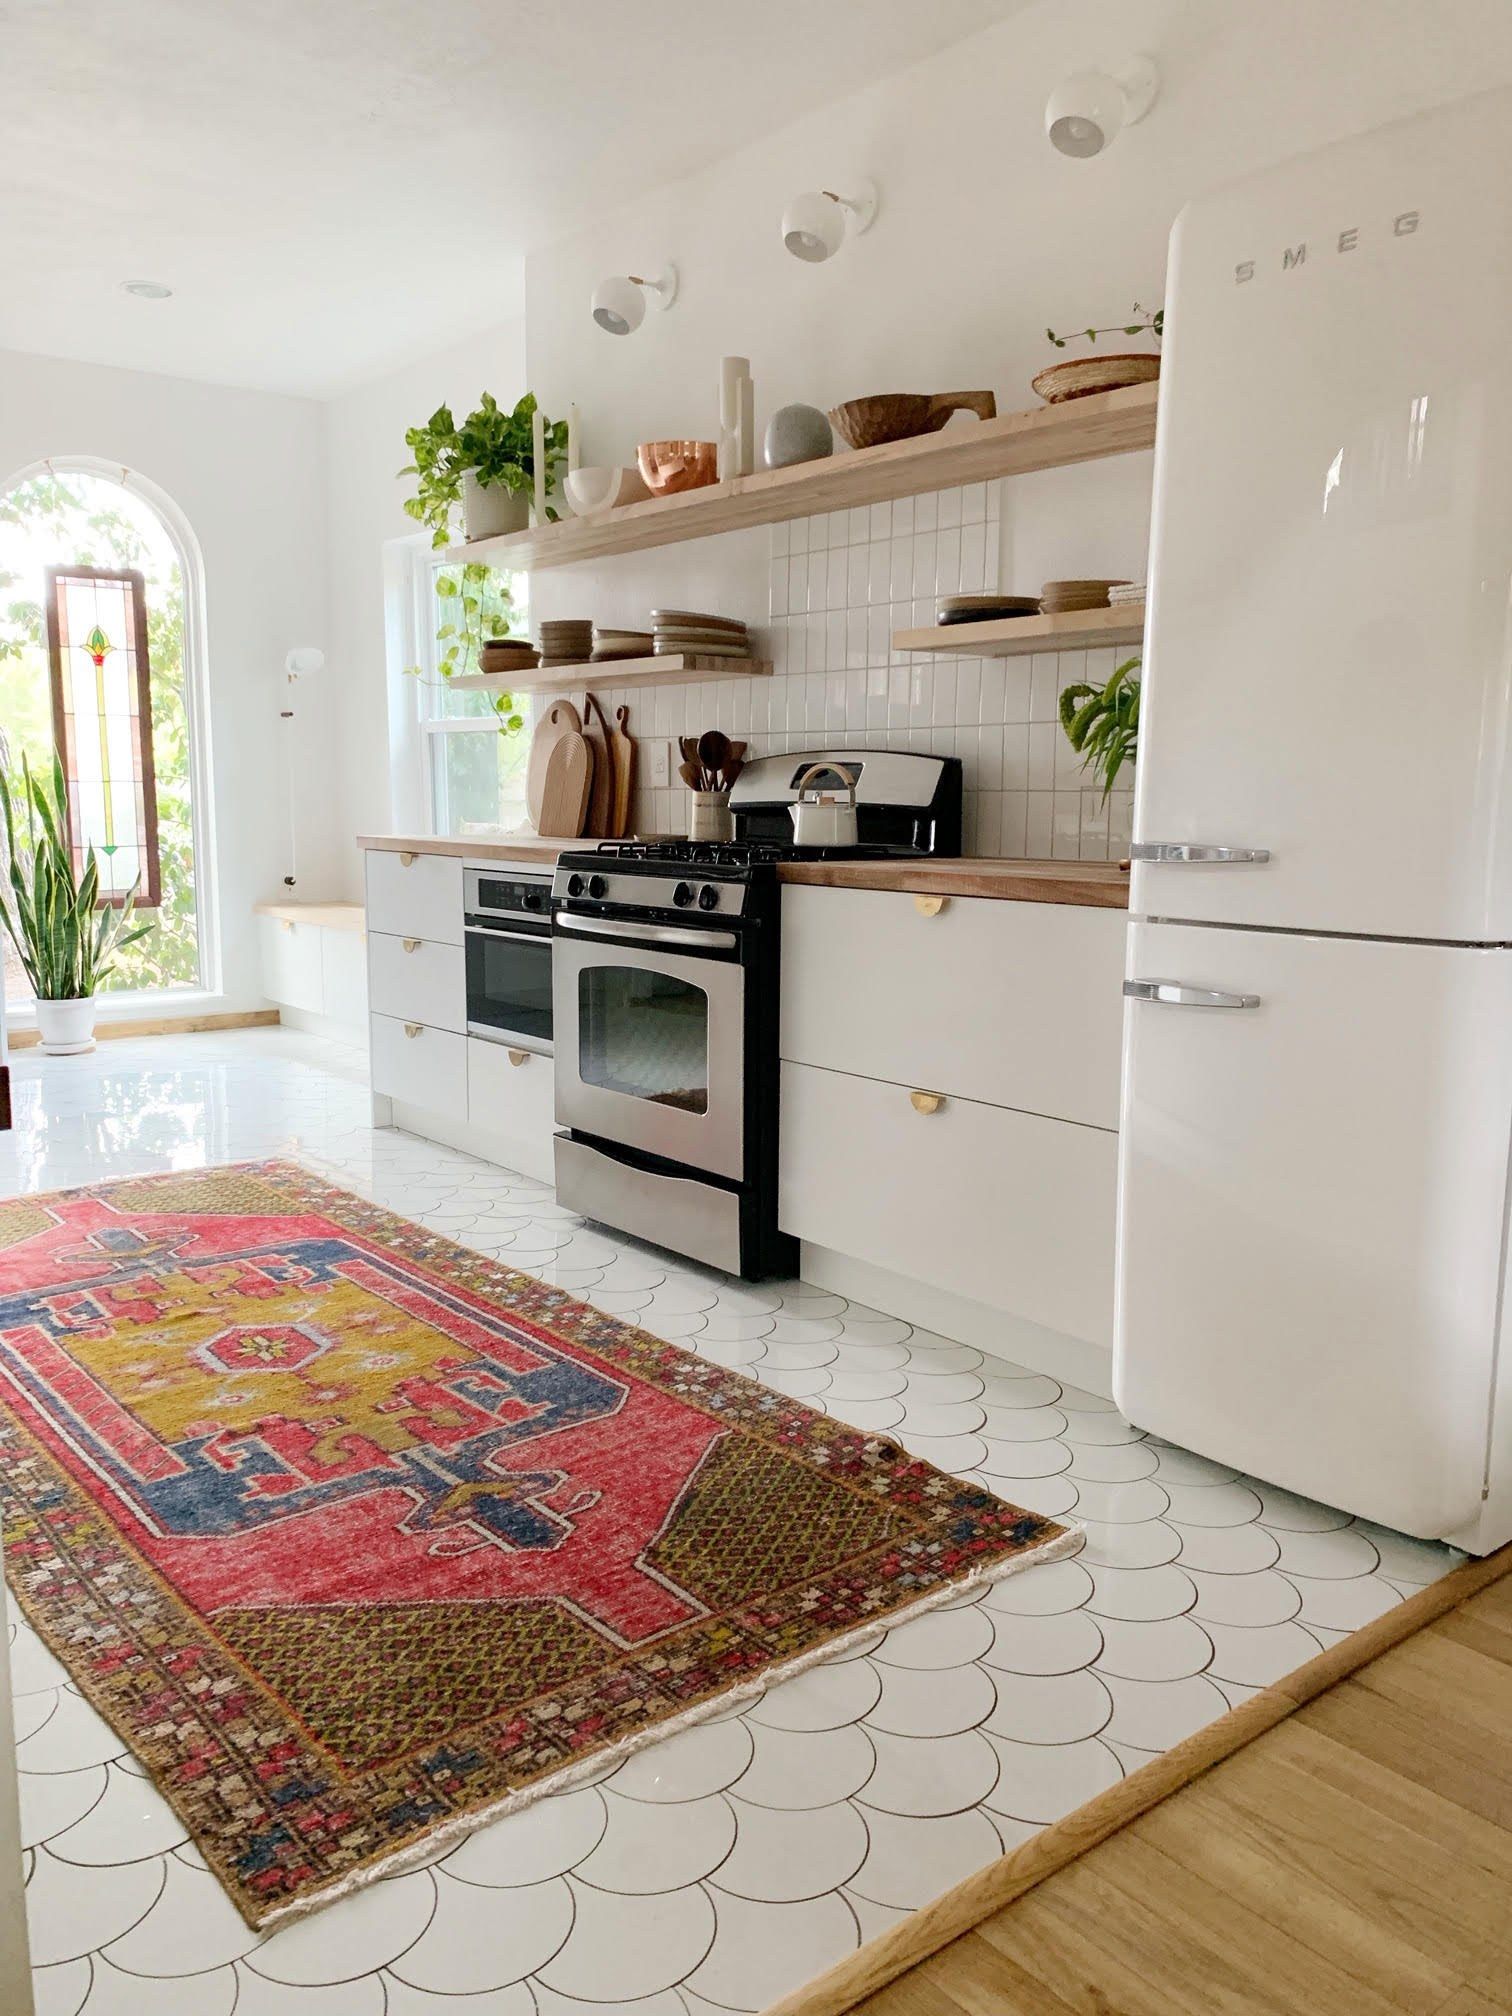 Spicing Up Your Space: Innovative Ideas
for Kitchen Flooring